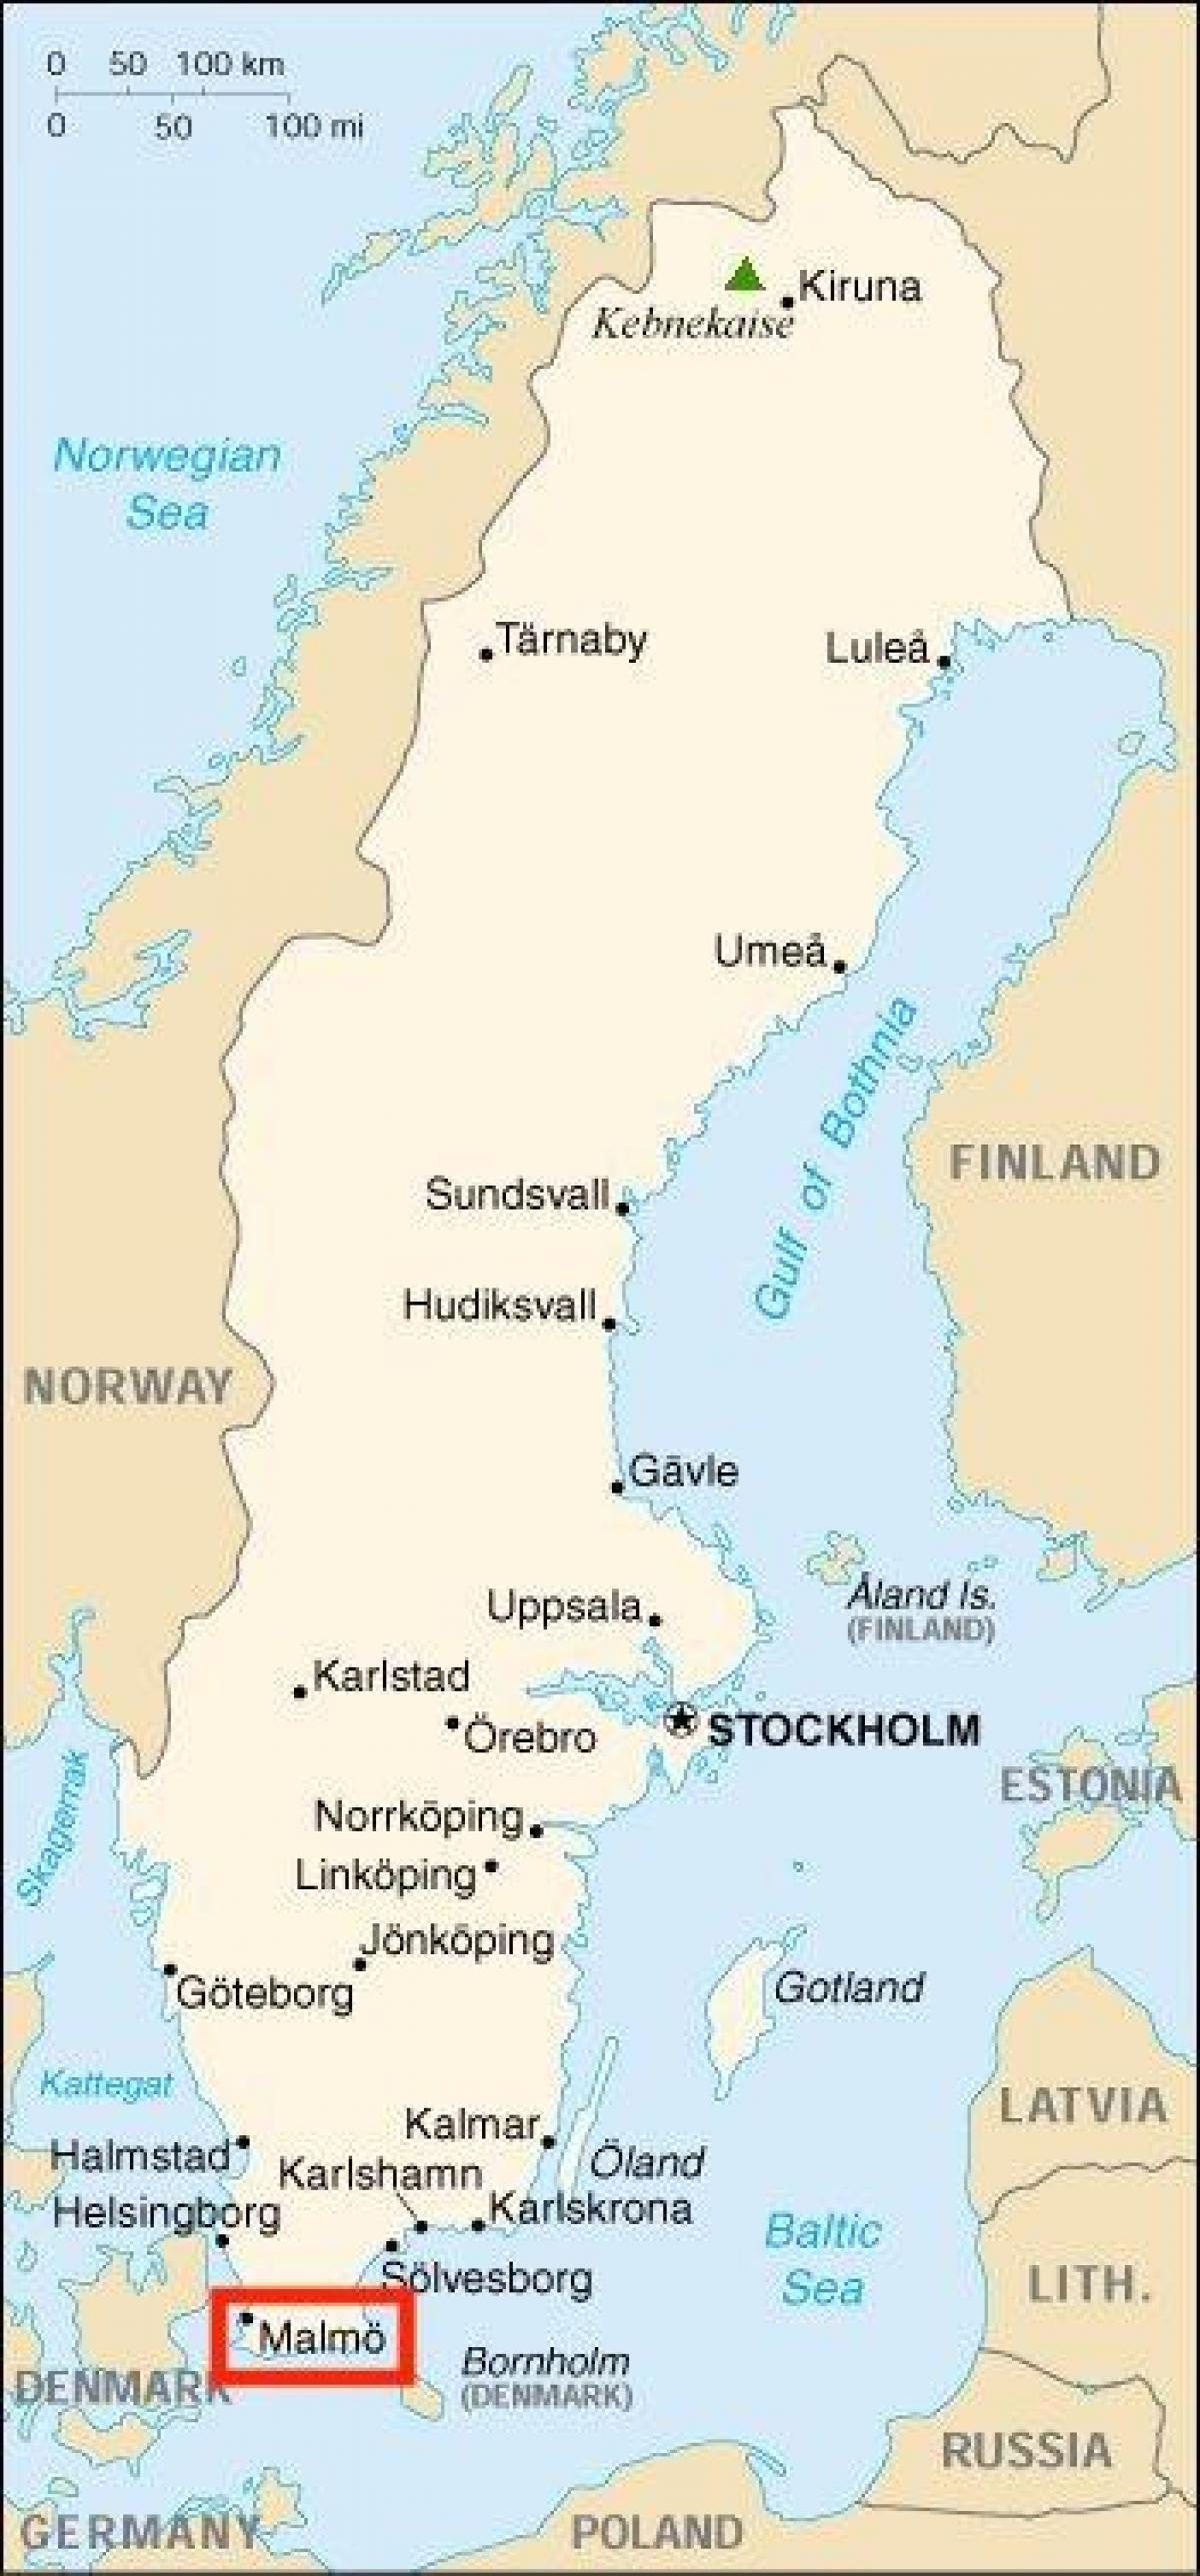 Malmo Sweden map - Sweden malmo map (Northern Europe - Europe)